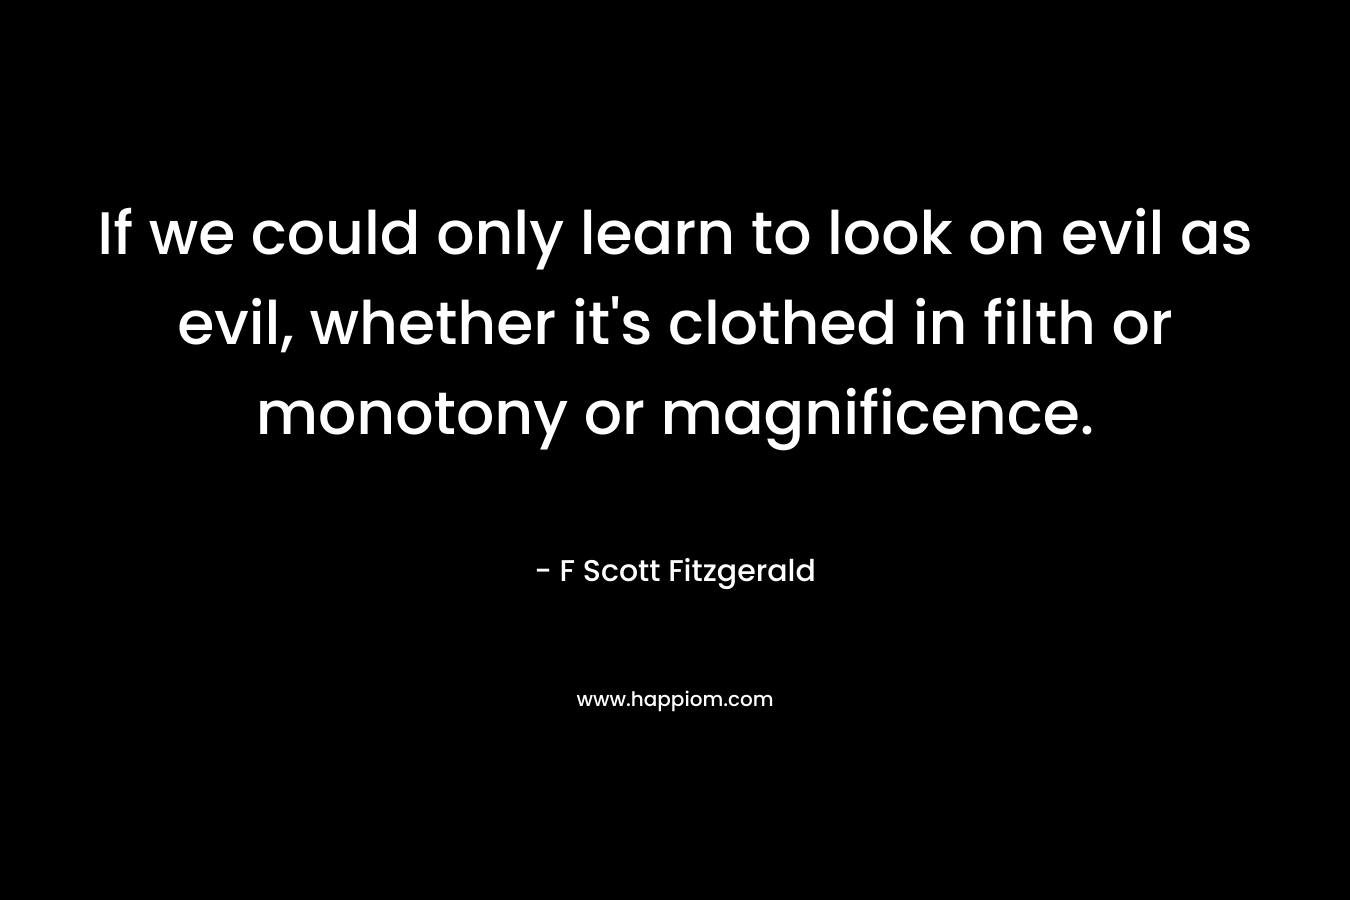 If we could only learn to look on evil as evil, whether it's clothed in filth or monotony or magnificence.